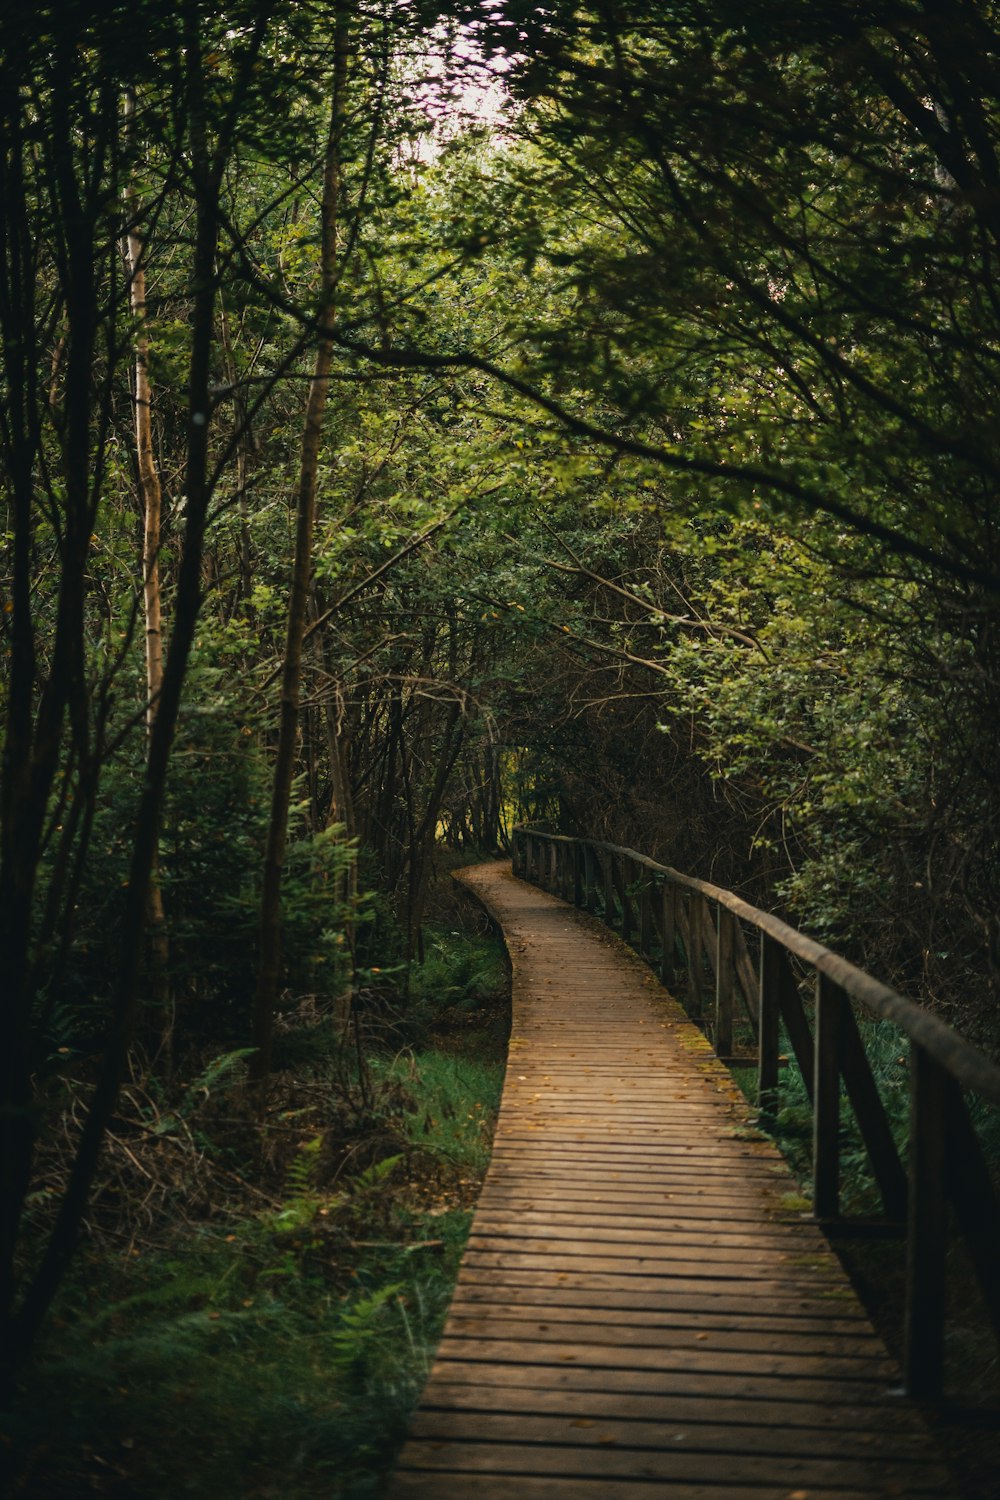 a wooden path through a forest with lots of trees